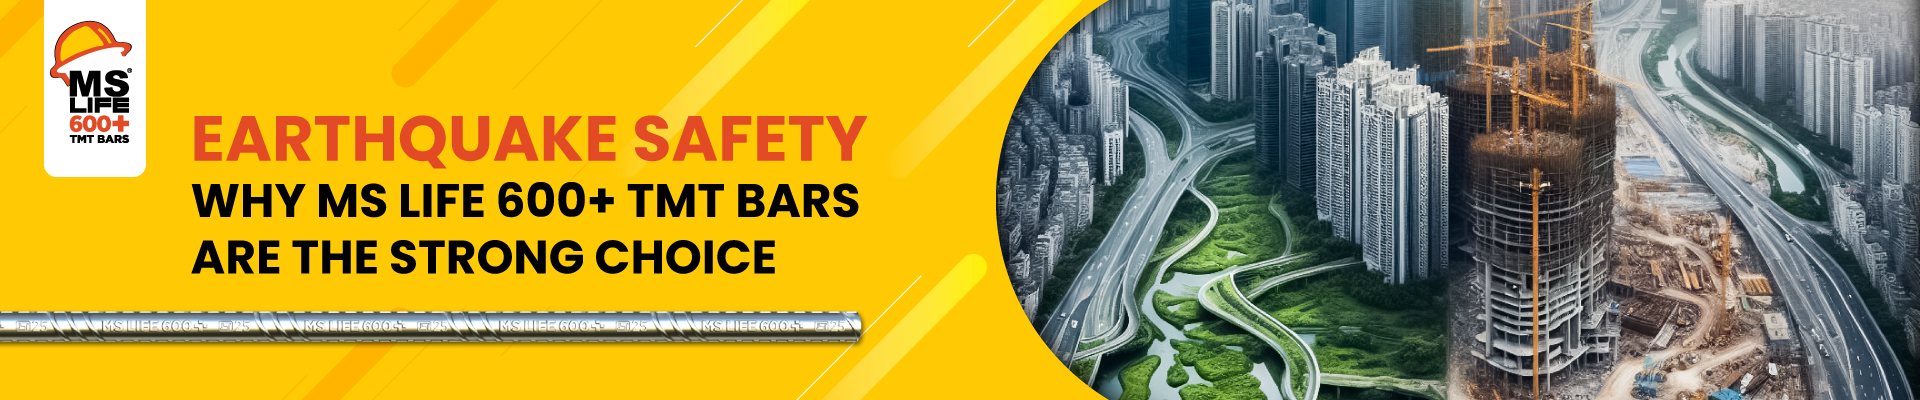 Earthquake Safety: Why MS Life 600+ TMT Bars are the Strong Choice